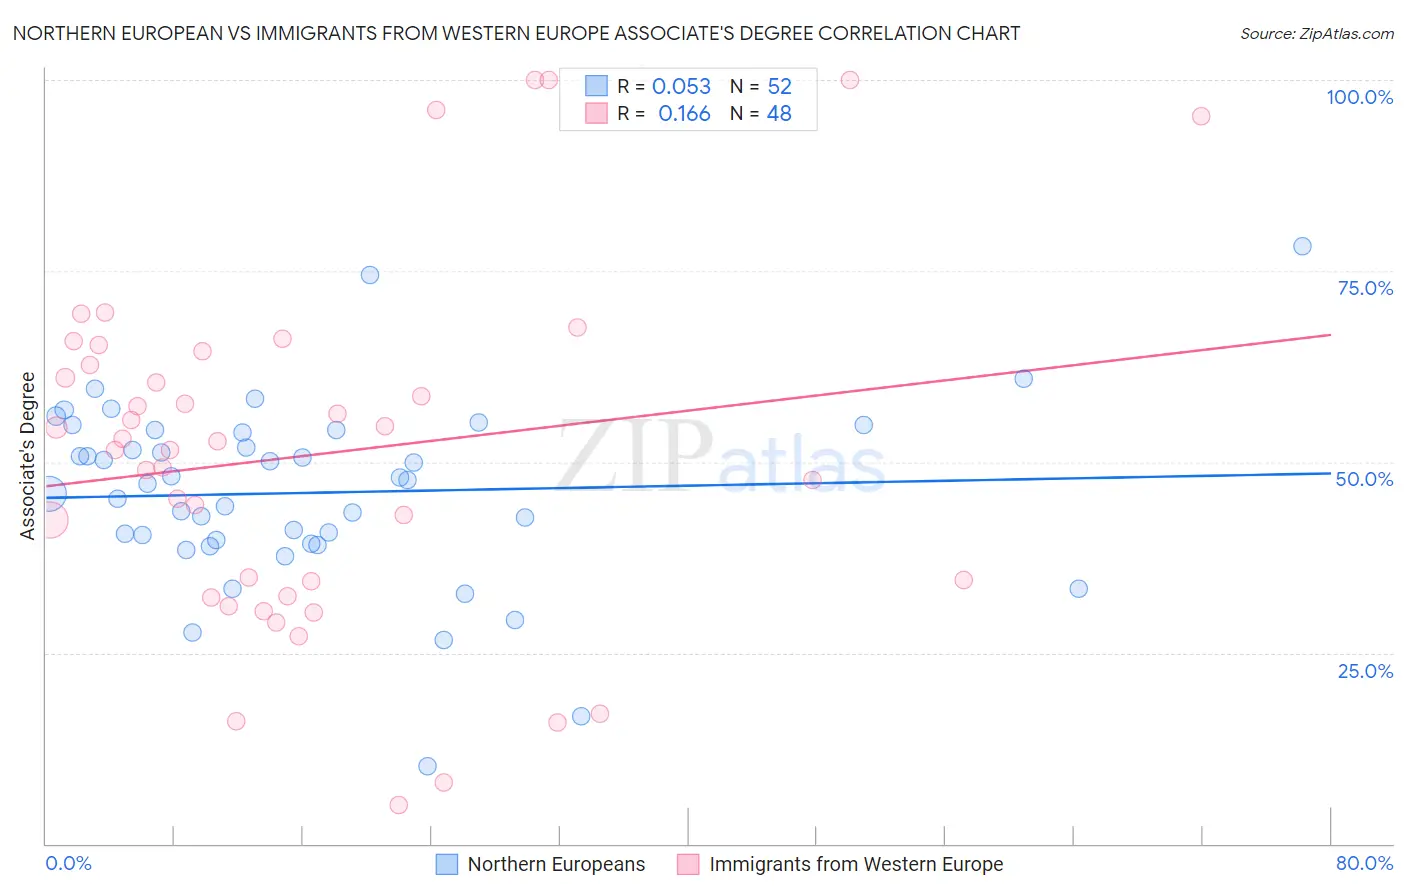 Northern European vs Immigrants from Western Europe Associate's Degree